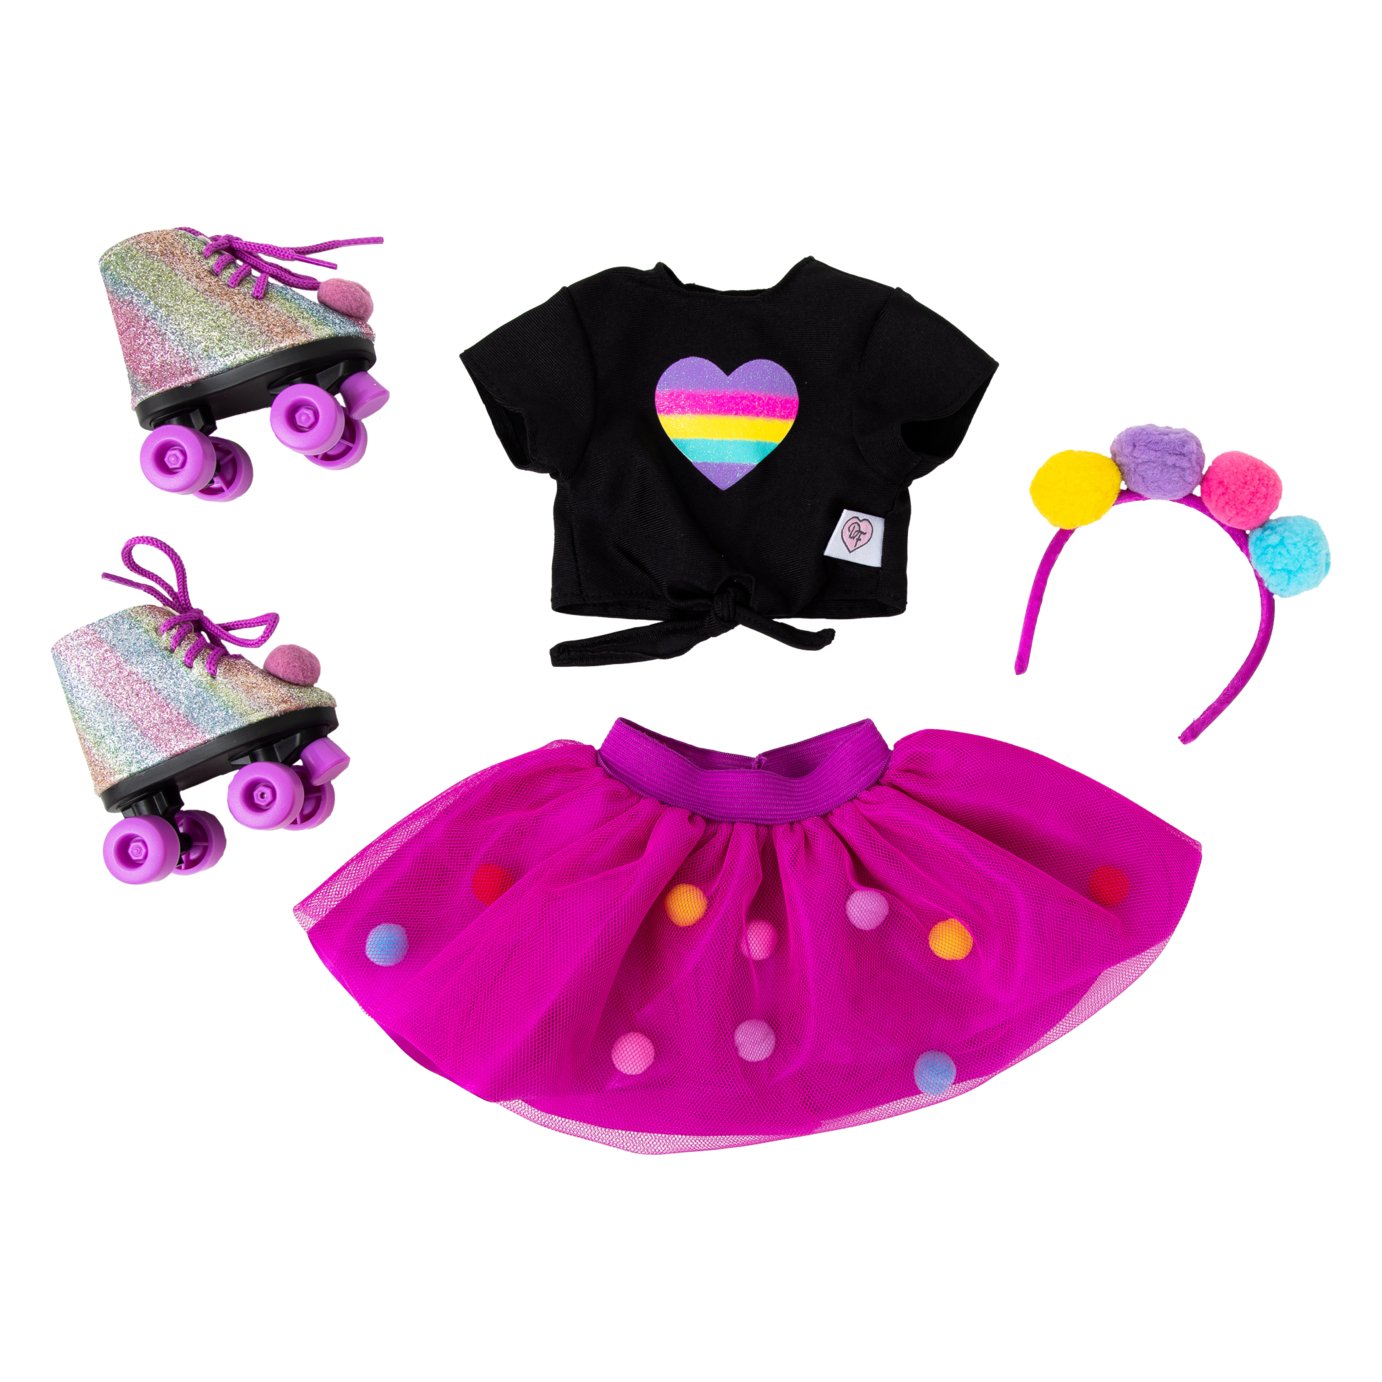 Designafriend Roller Skater Outfit Review